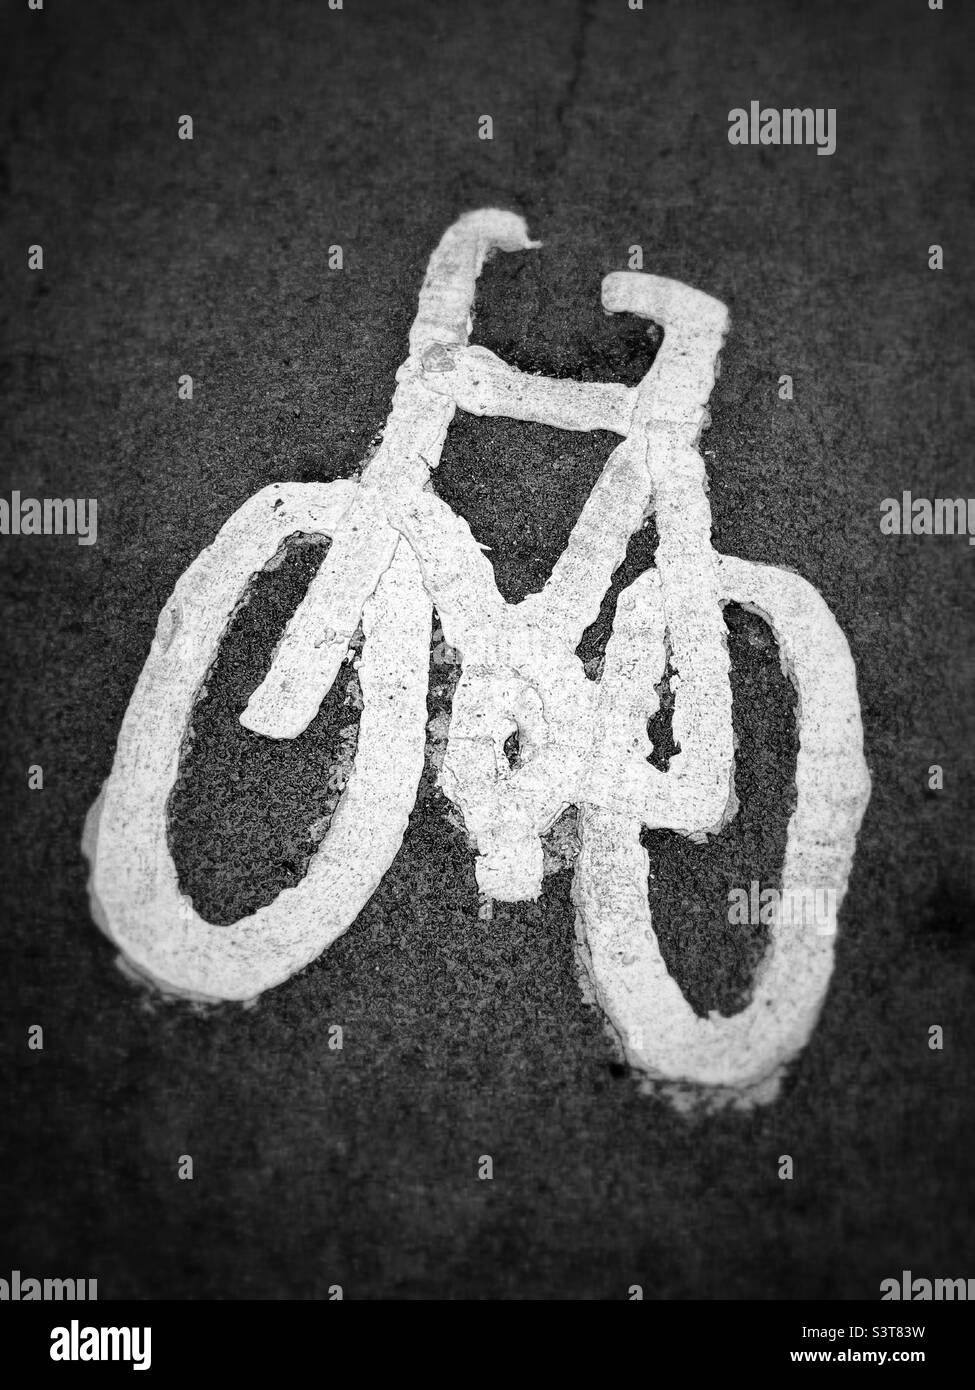 The logo picture of a bicycle painted onto a section of tarmac. This area is a designed bicycle lane. Photo ©️ COLIN HOSKINS. Stock Photo